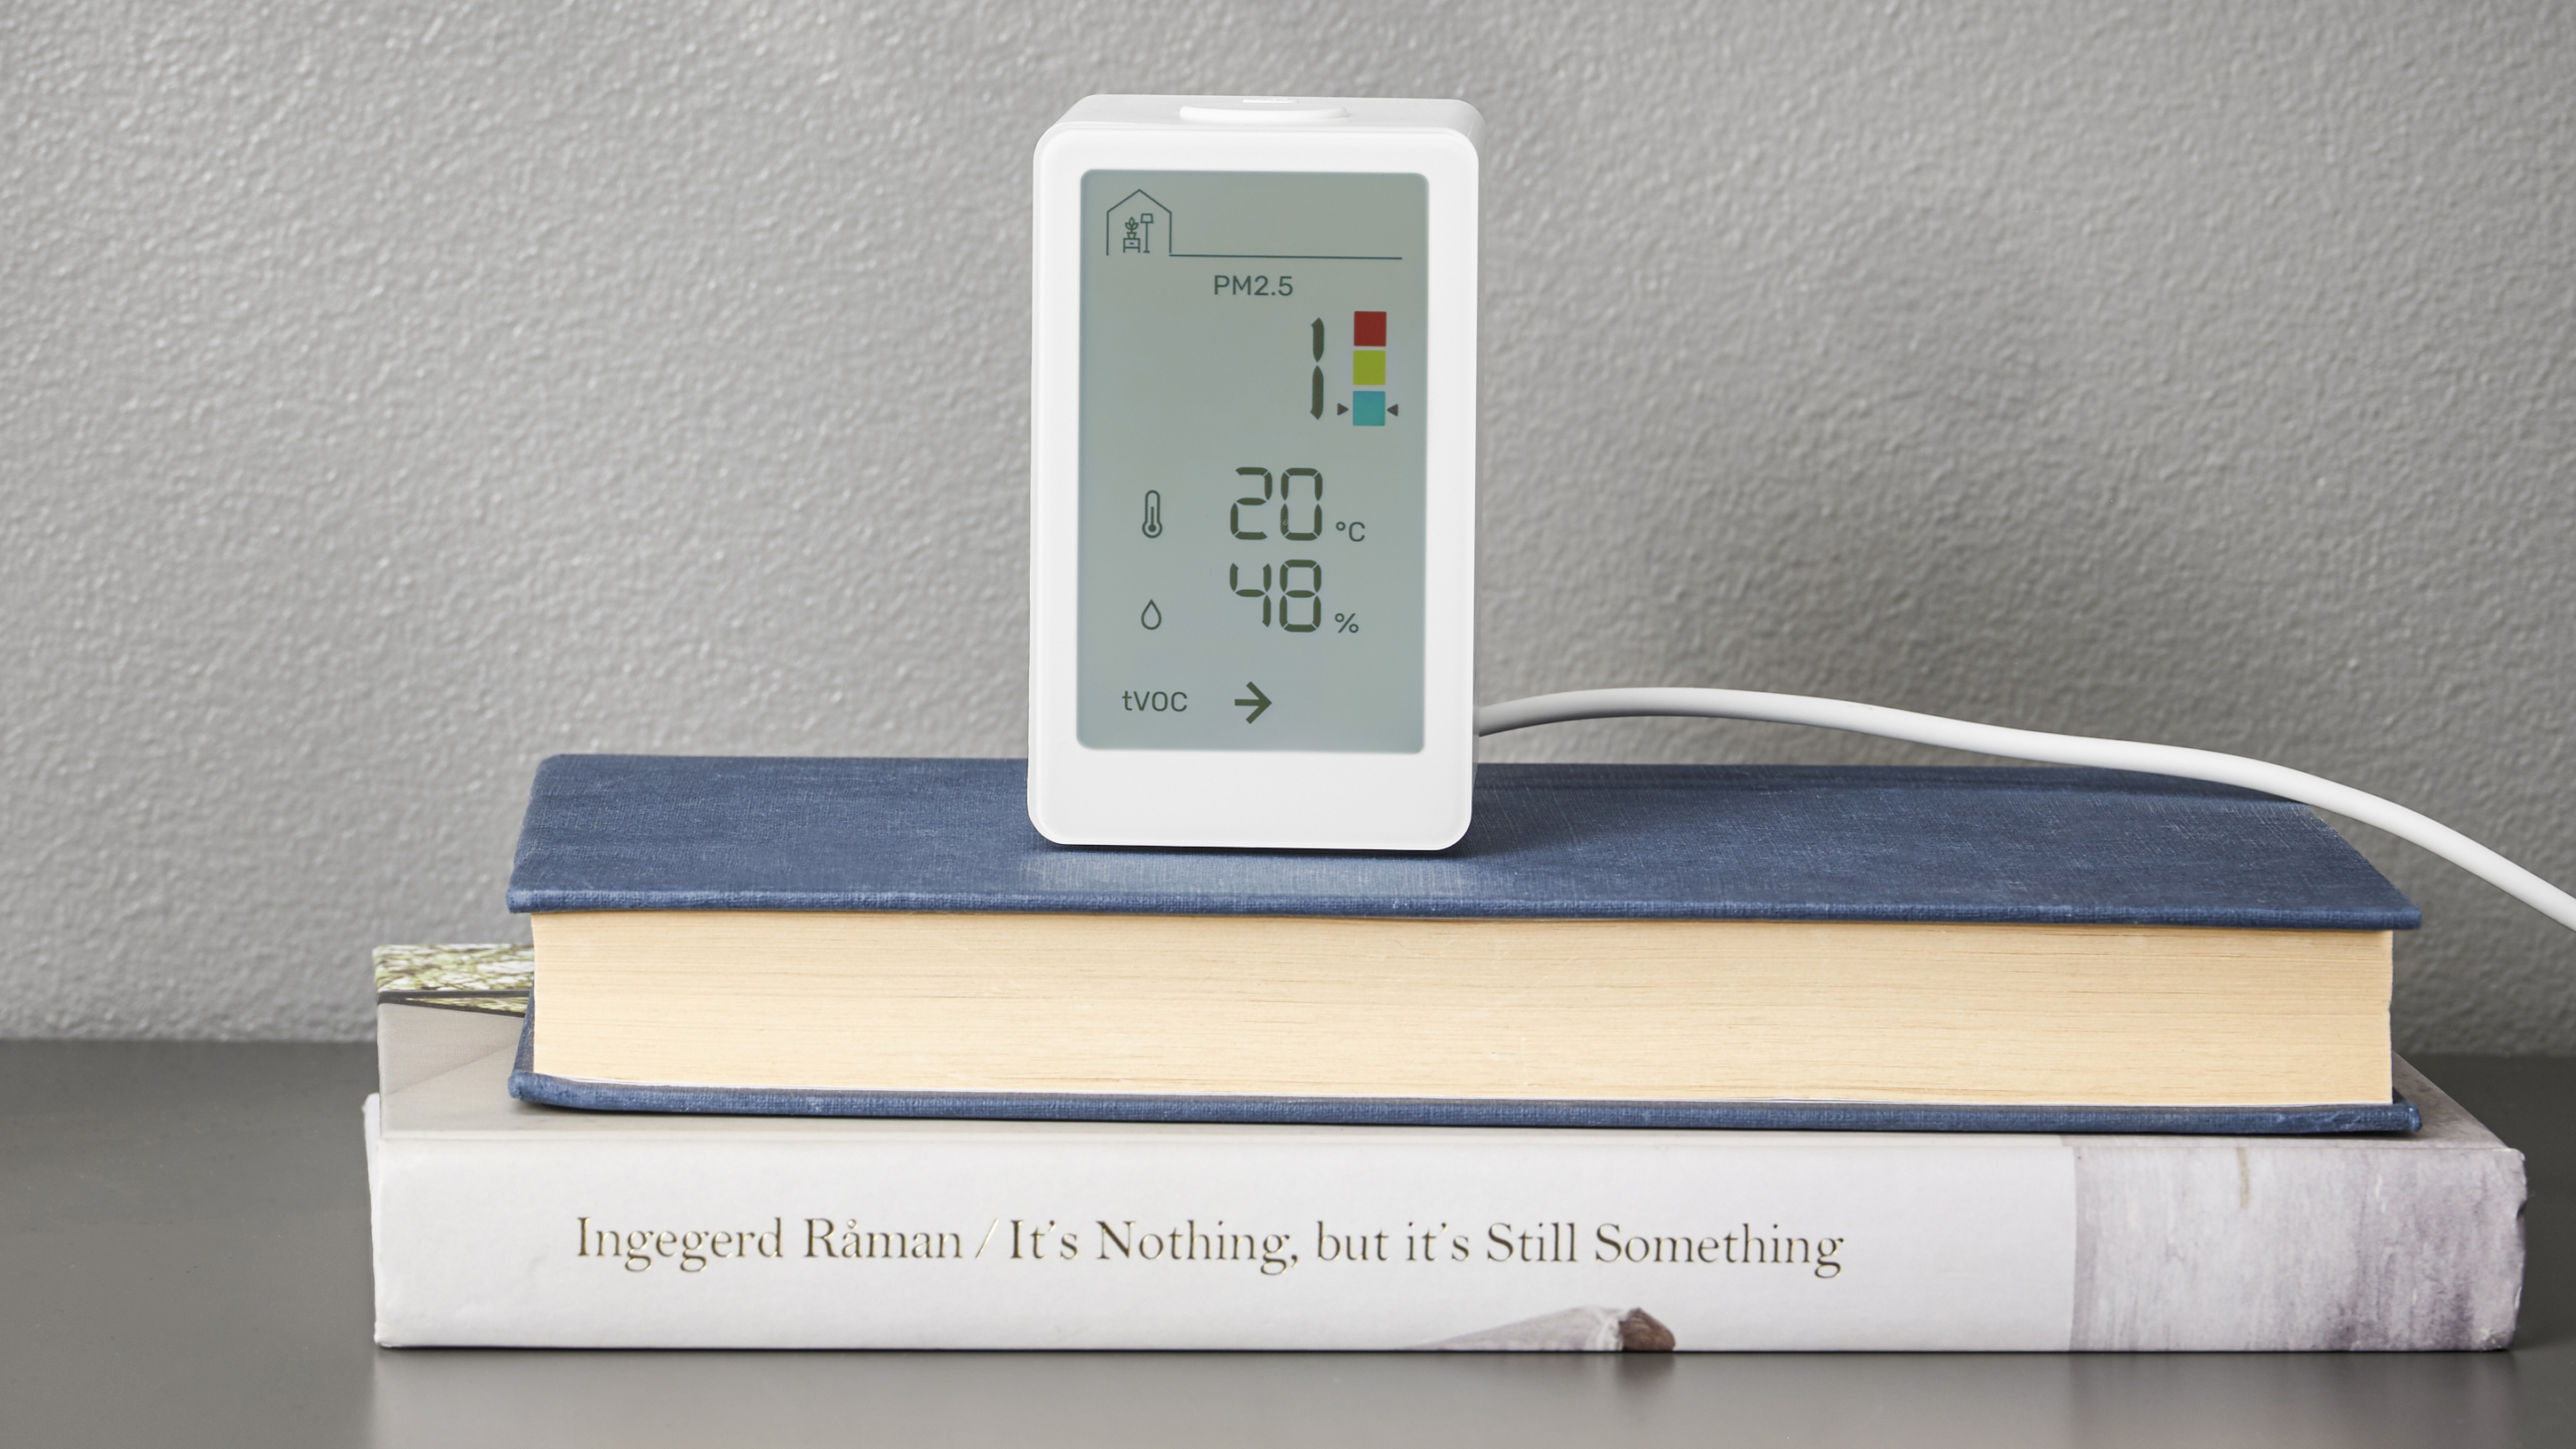 The IKEA VINDSTYRKA smart air quality monitor on a table